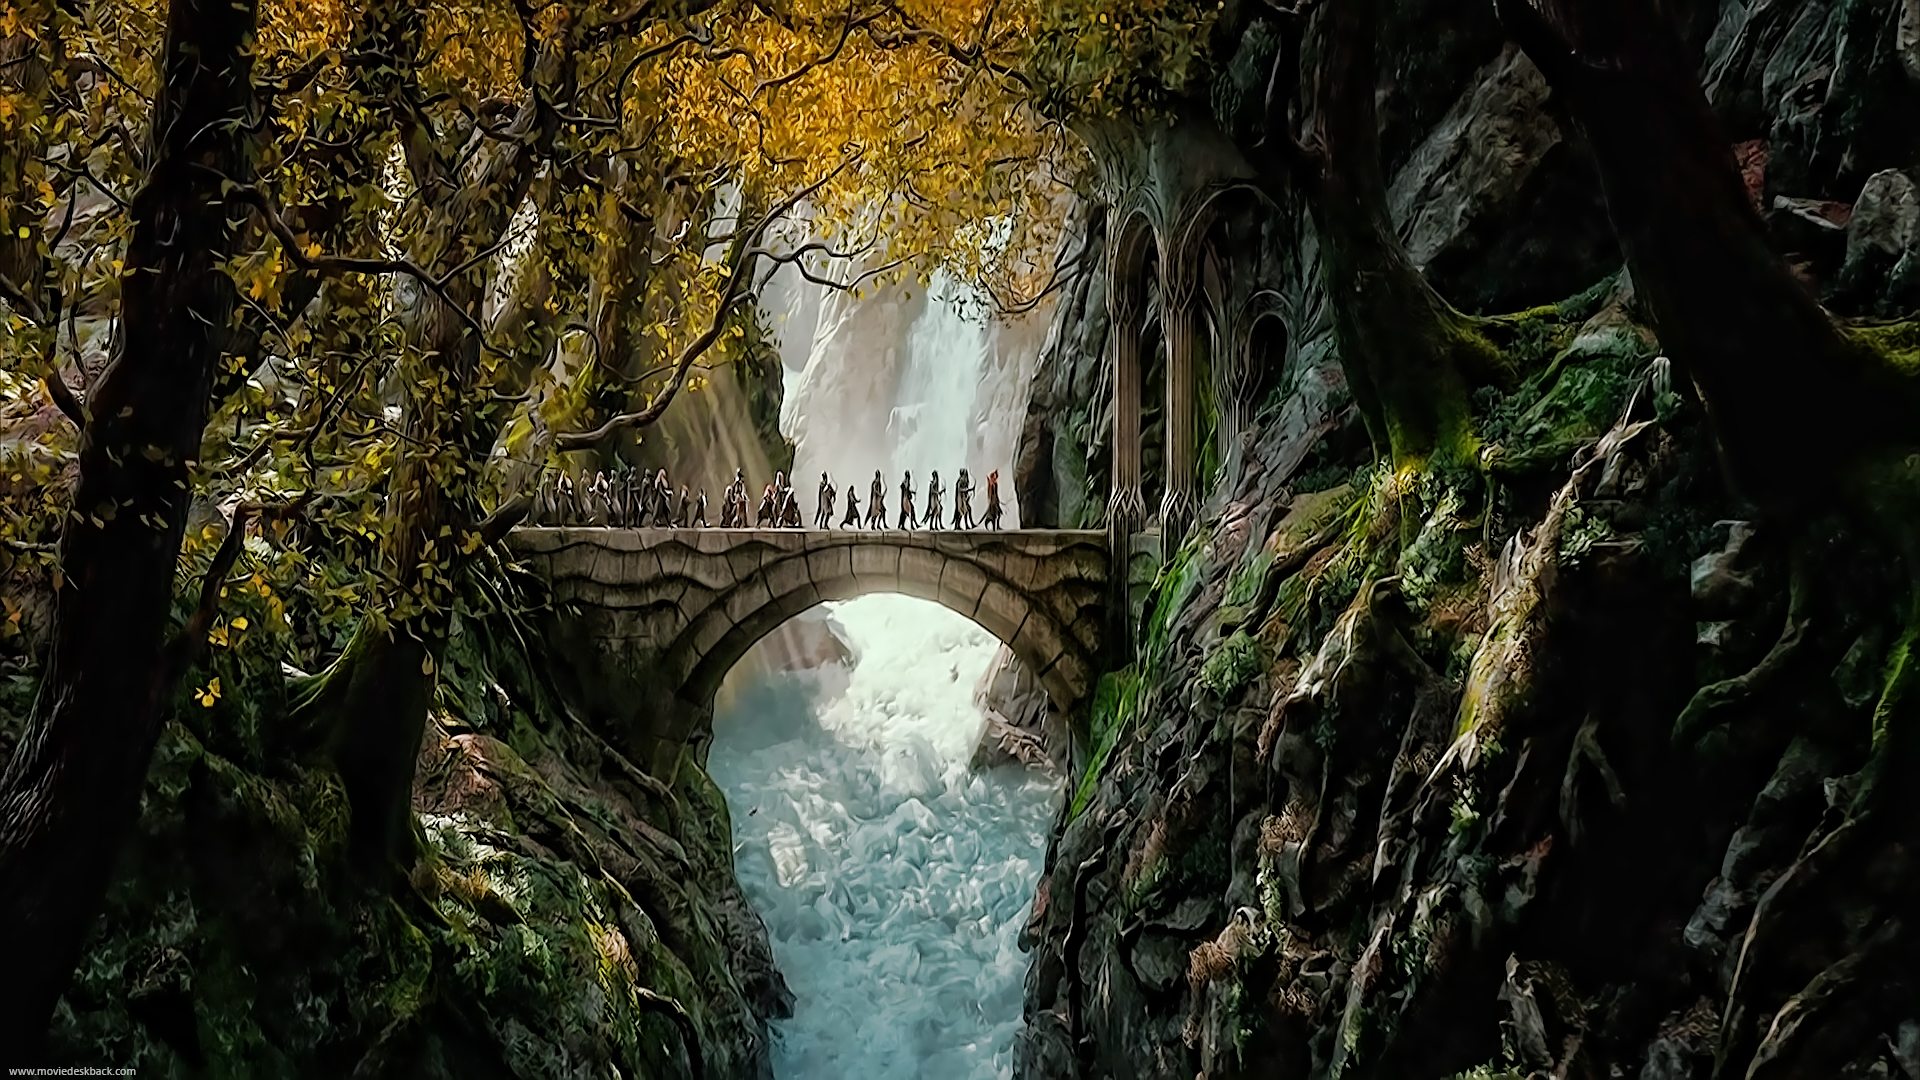 The Hobbit The Desolation of Smaug fantastic landscape wallpapers 1920x1080